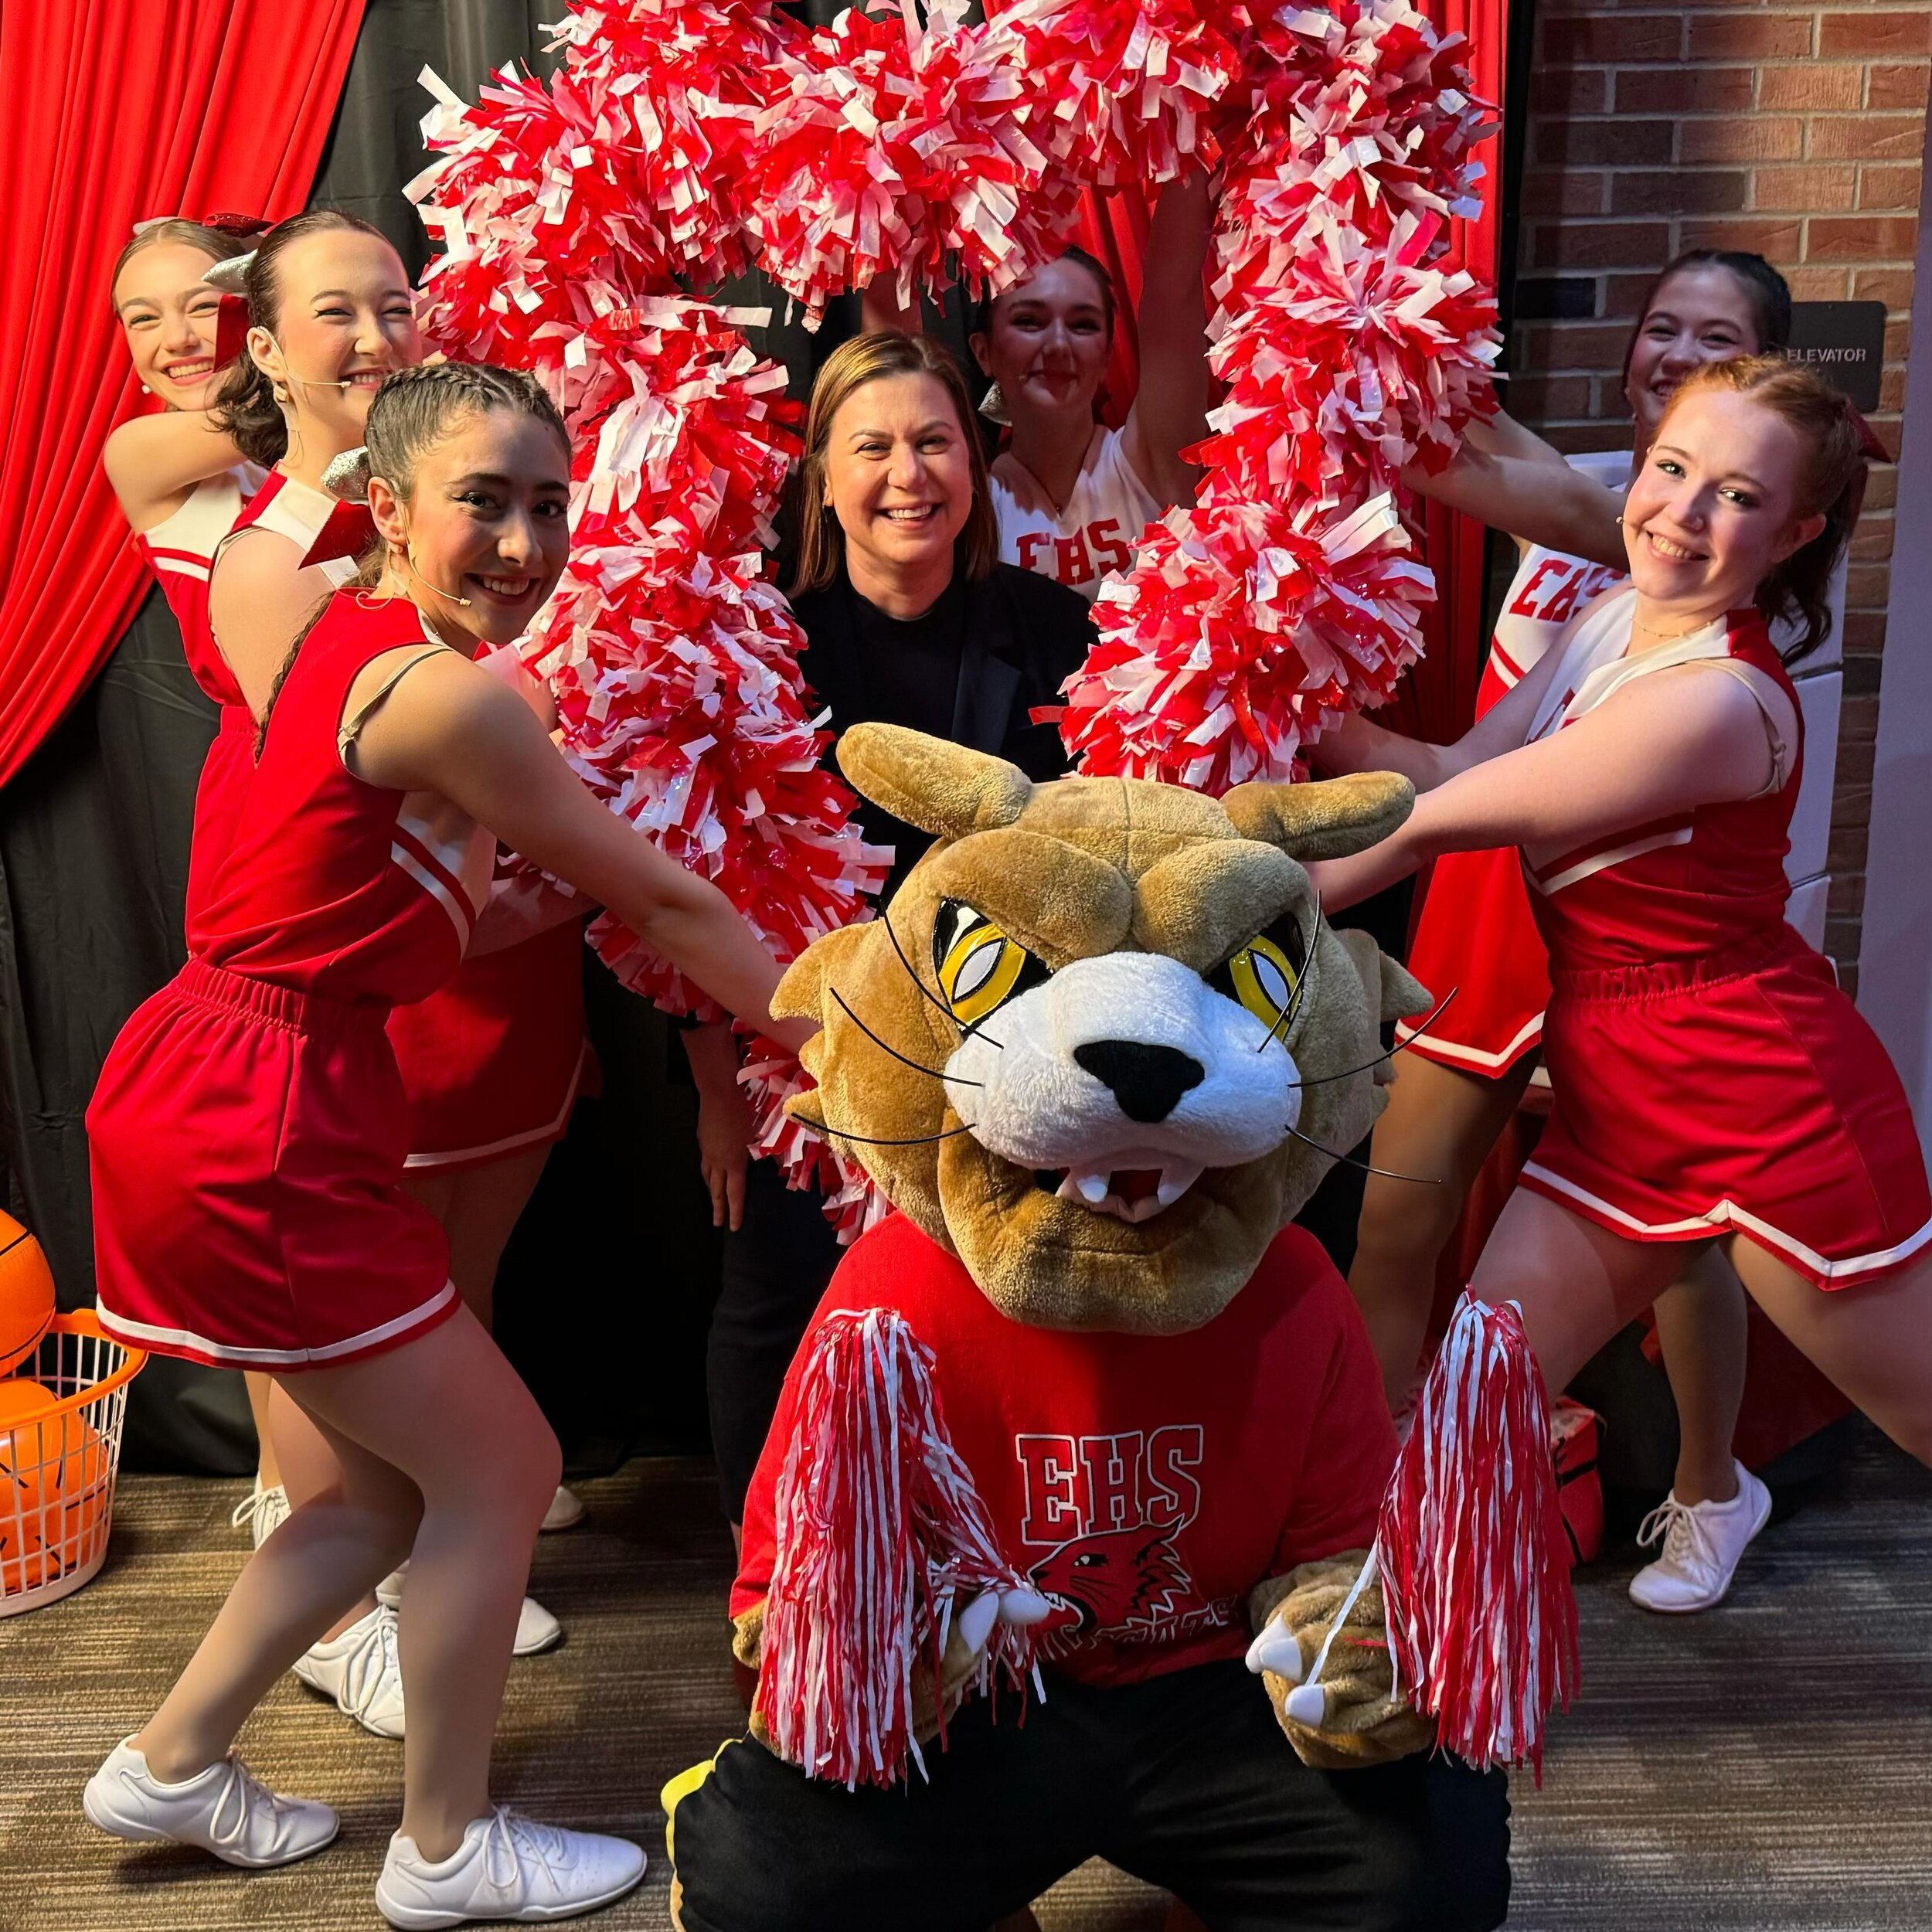 We had a very special visitor at High School Musical last night! ❤️

A big Wildcat cheer for U.S. Rep. Elissa Slotkin, one of Brighton Musical&rsquo;s biggest fans! 🤩